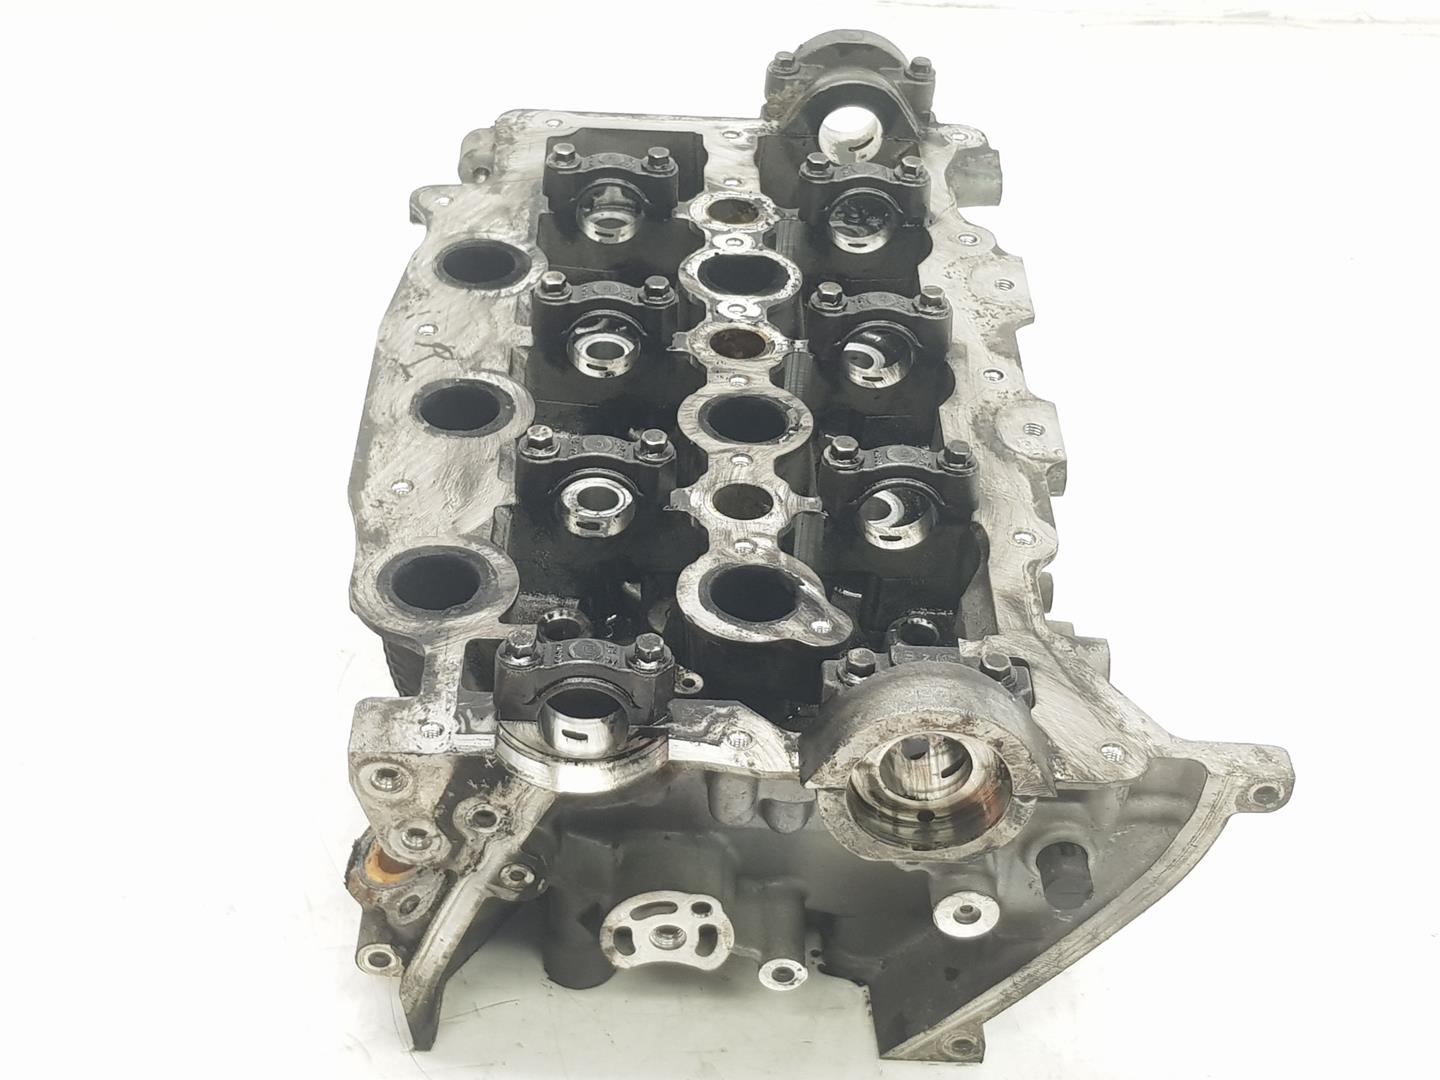 LAND ROVER Discovery 3 generation (2004-2009) Engine Cylinder Head 1311303, 1311303, 1111AA 24238316